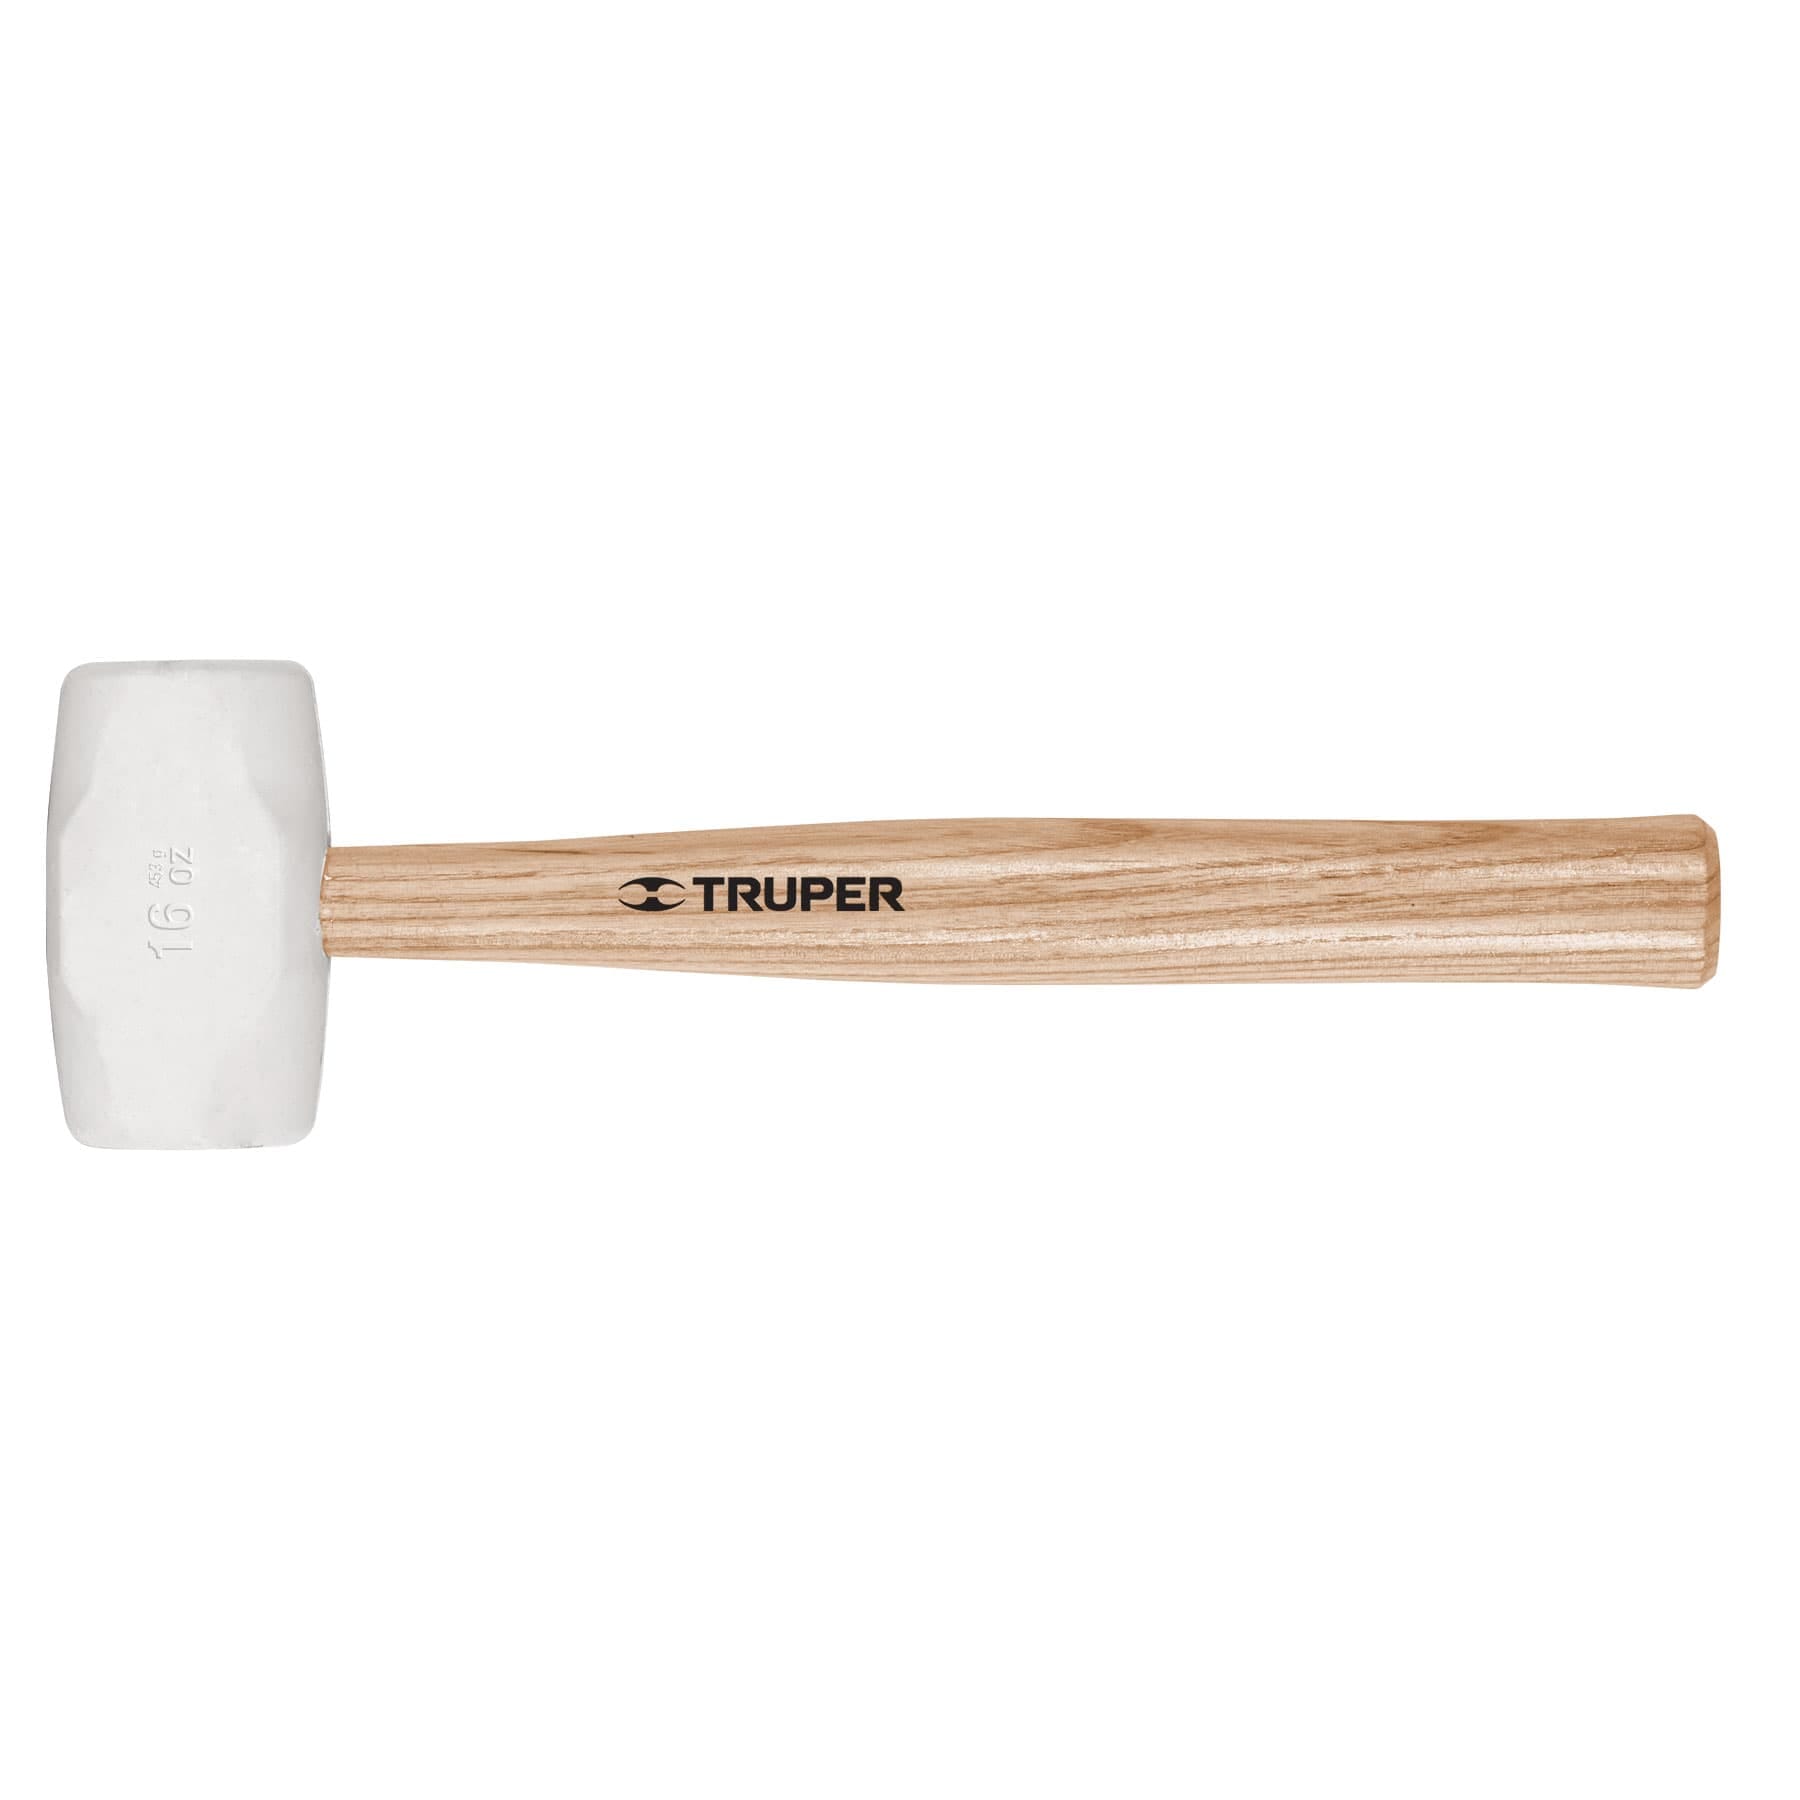 Truper Rubber Mallet White  non marking with Wooden Handle 1lb